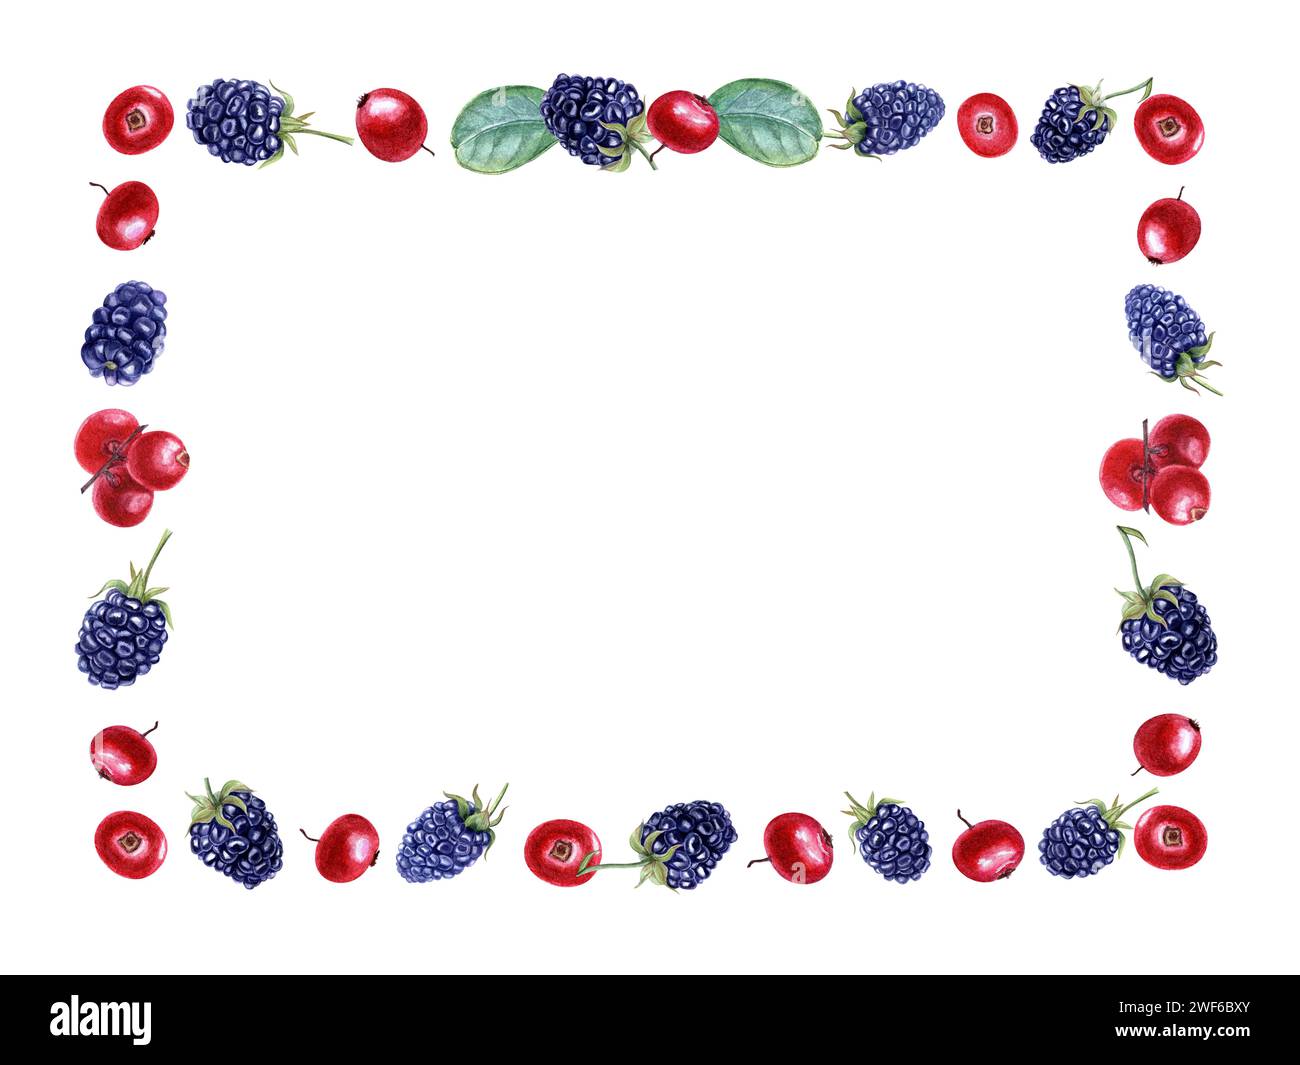 Forest berries with green leaves. Horizontal frame. Bearberries, cowberries. Blackberry, dewberry. Watercolor illustration isolated on white. Stock Photo